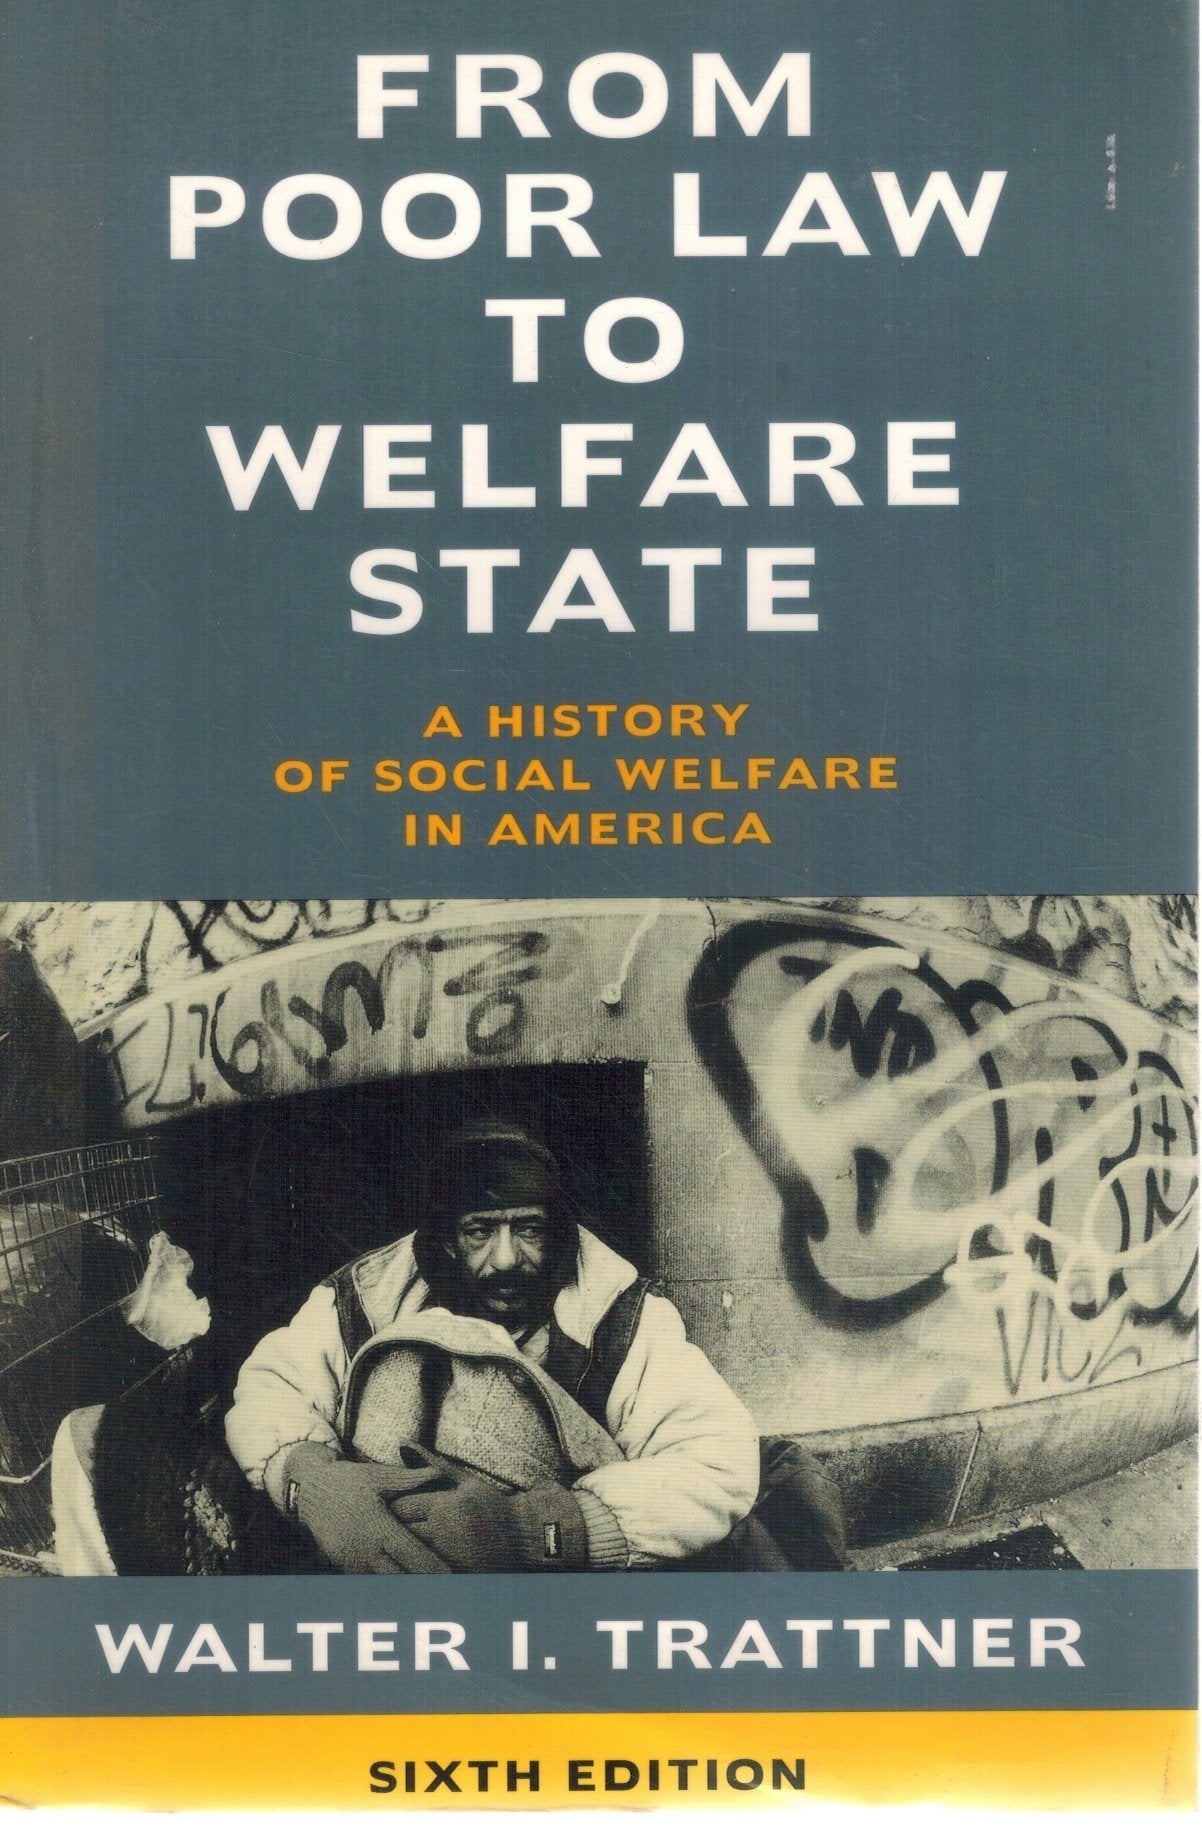 FROM POOR LAW TO WELFARE STATE, 6TH EDITION A History of Social Welfare in  America  by Trattner, Walter I.